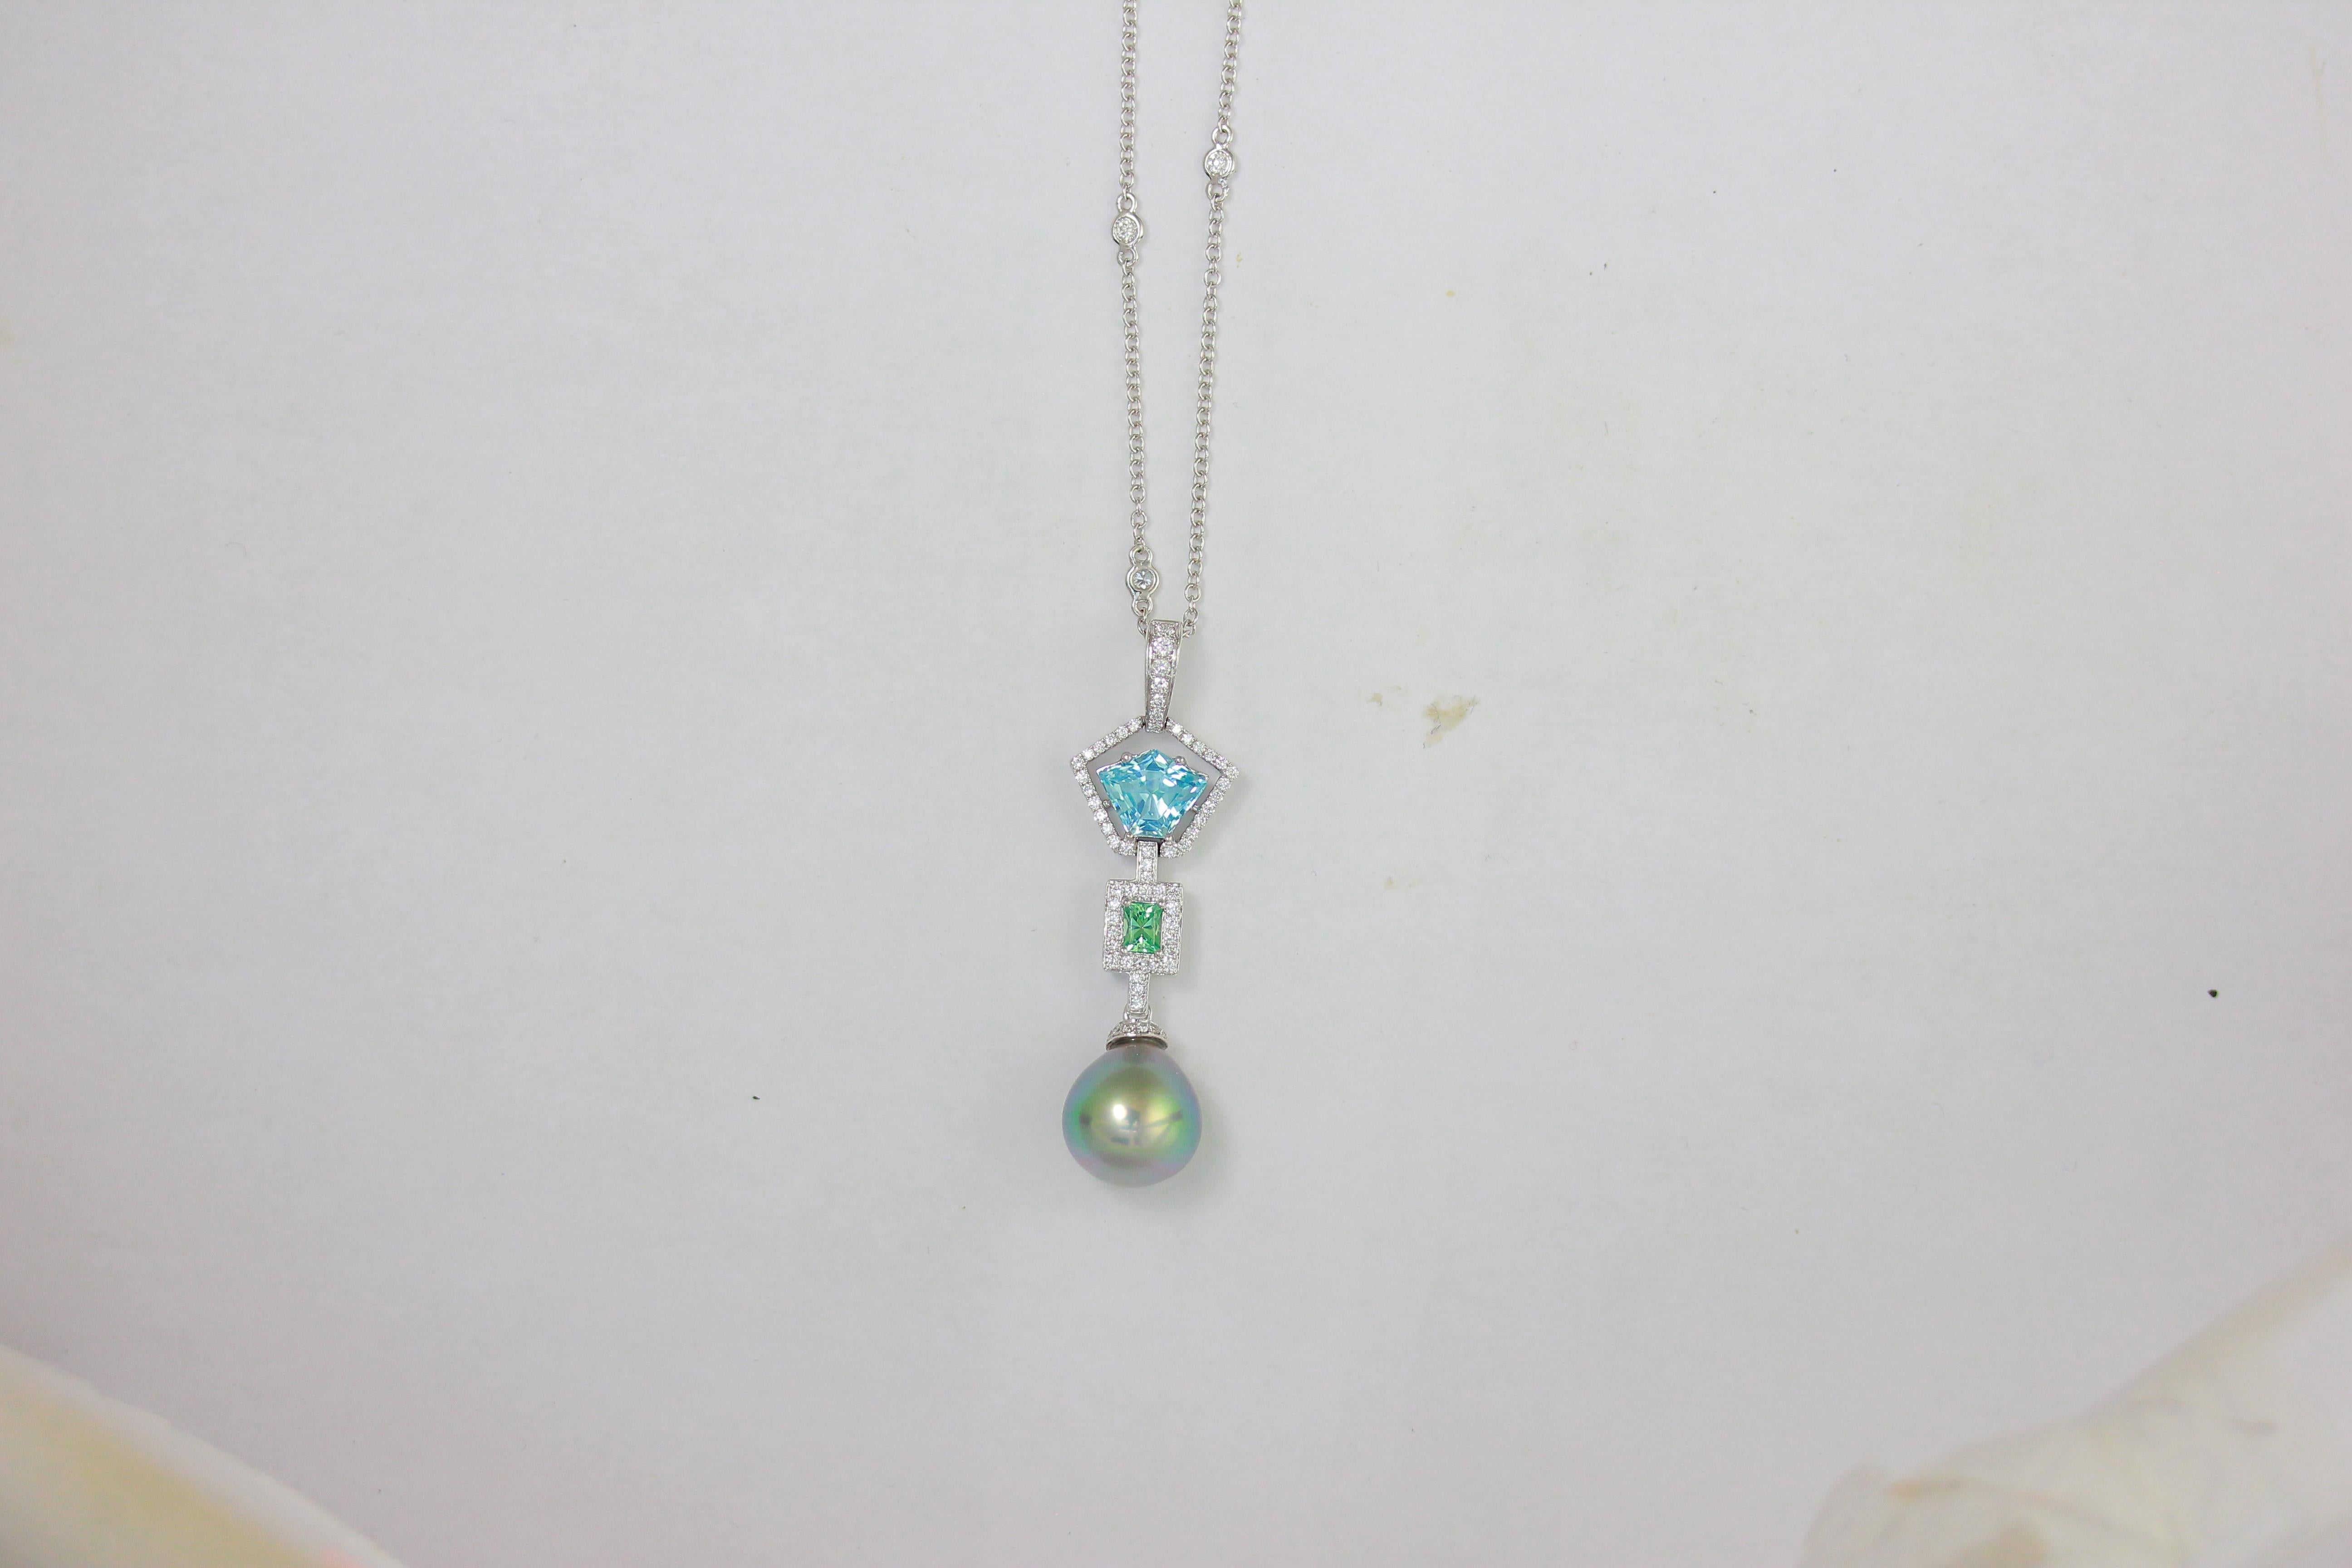 Contemporary Frederic Sage Blue Topaz, Green Tourmaline and Pearl Pendant